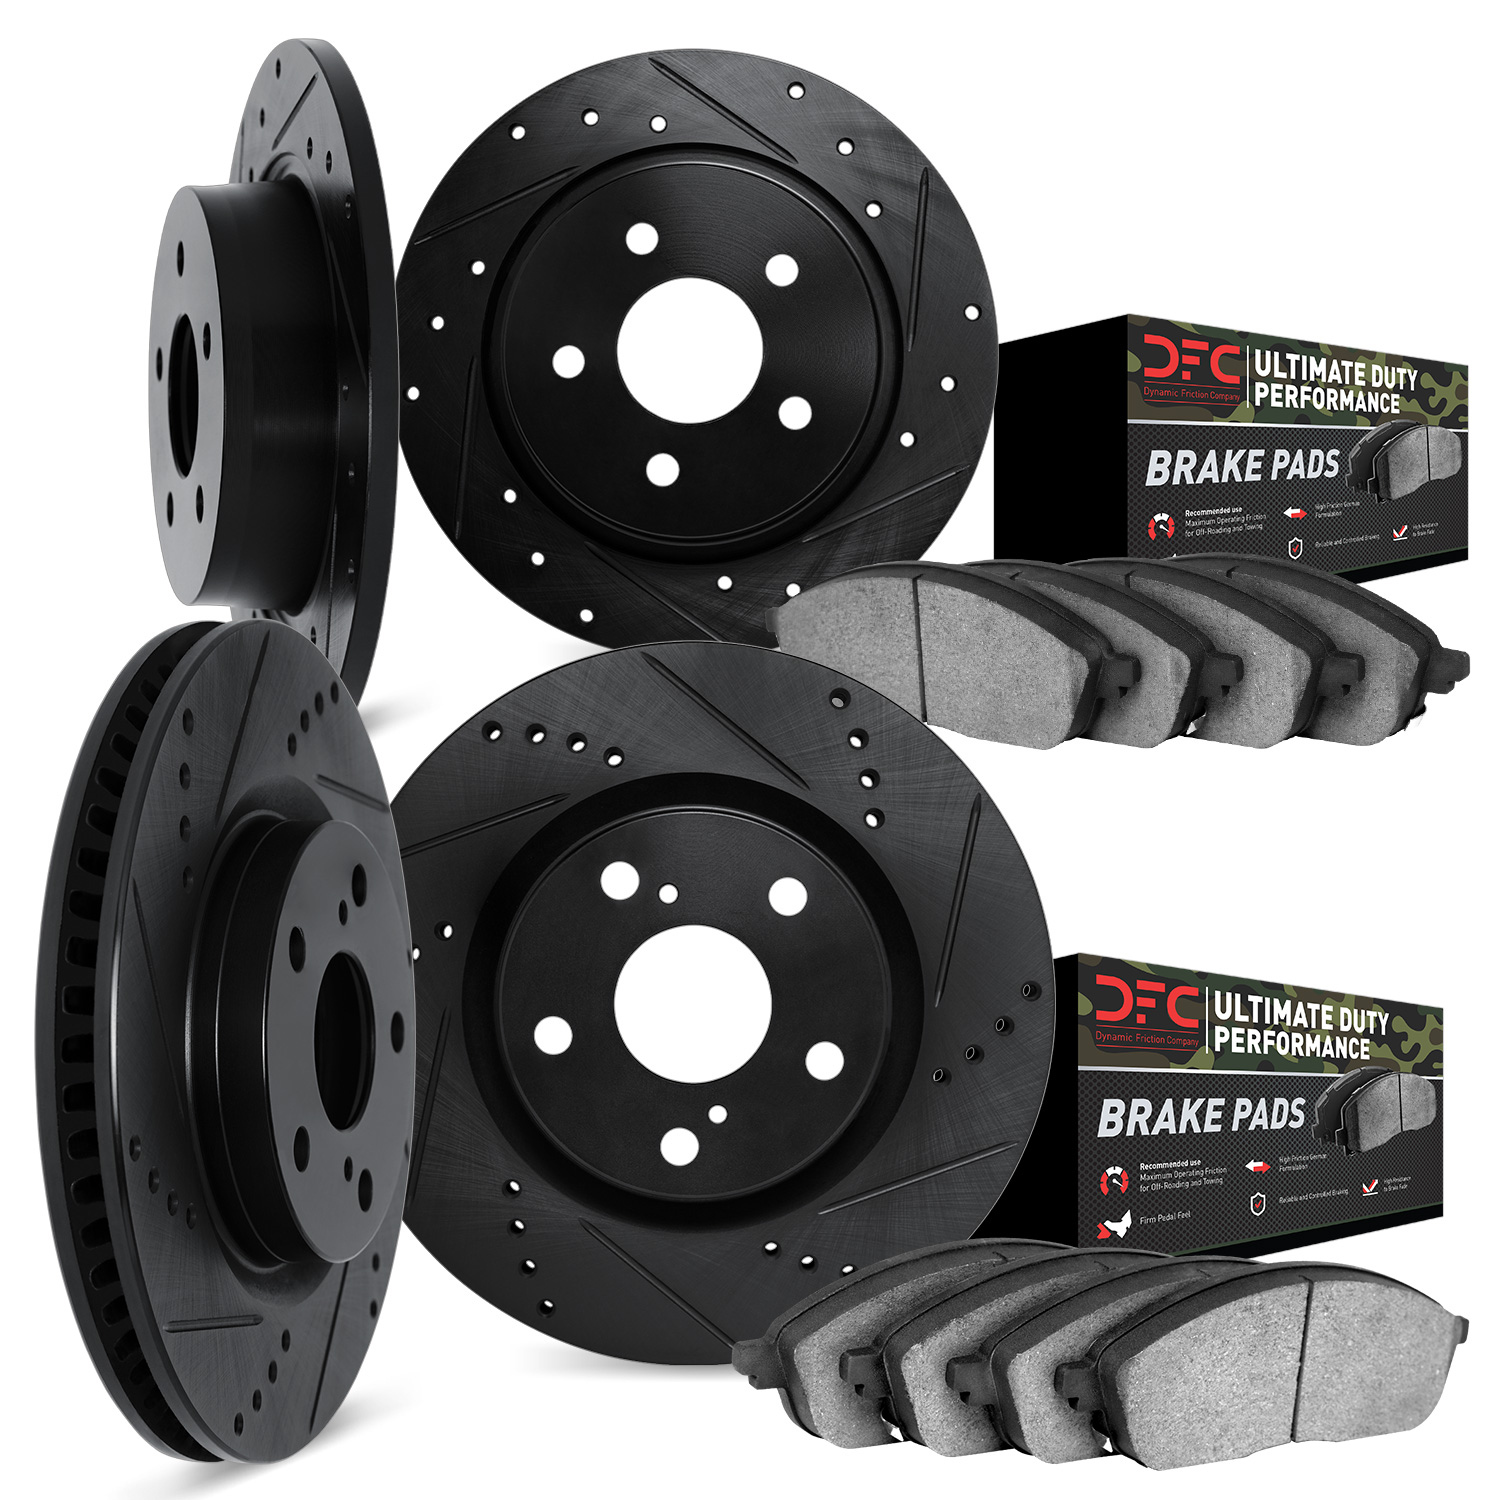 8404-54005 Drilled/Slotted Brake Rotors with Ultimate-Duty Brake Pads Kit [Black], 1997-2004 Ford/Lincoln/Mercury/Mazda, Positio